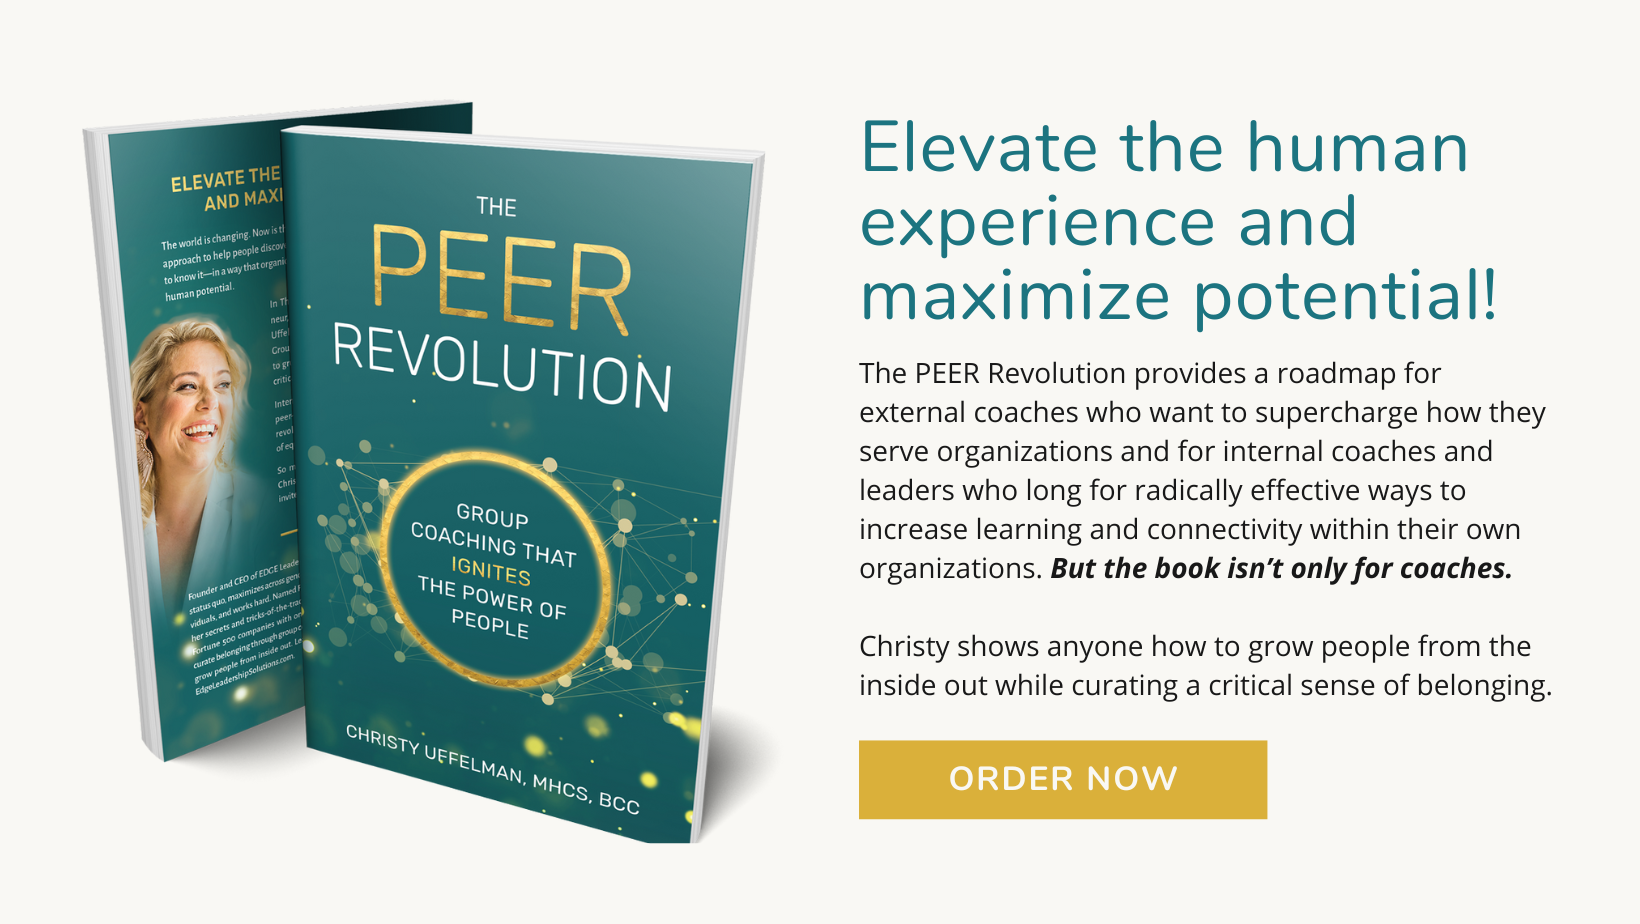 The PEER Revolution – Group Coaching That Ignites the Power of People